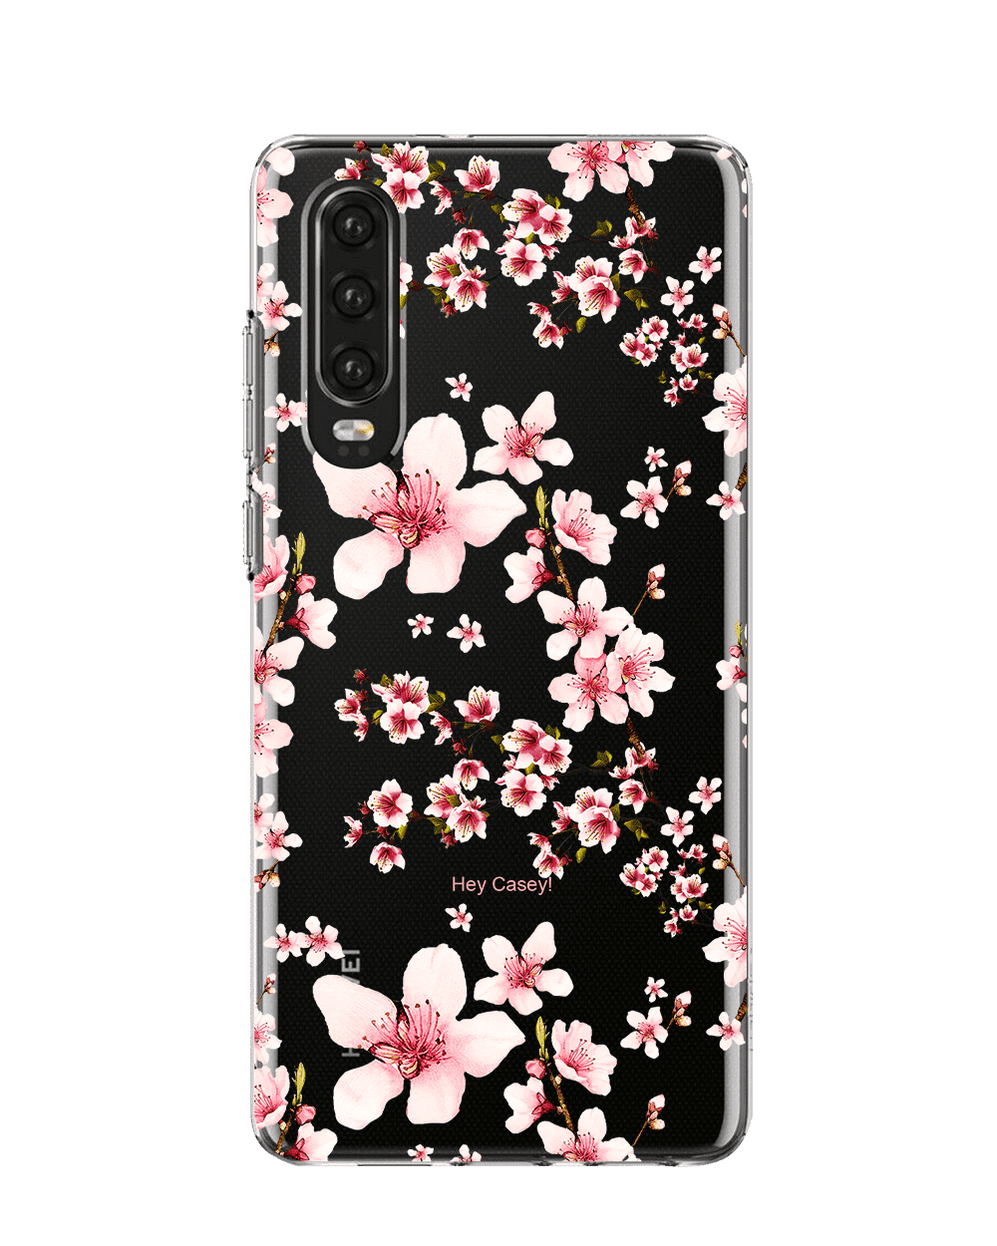 Cherry Blossoms Phone Case — Hey Casey!